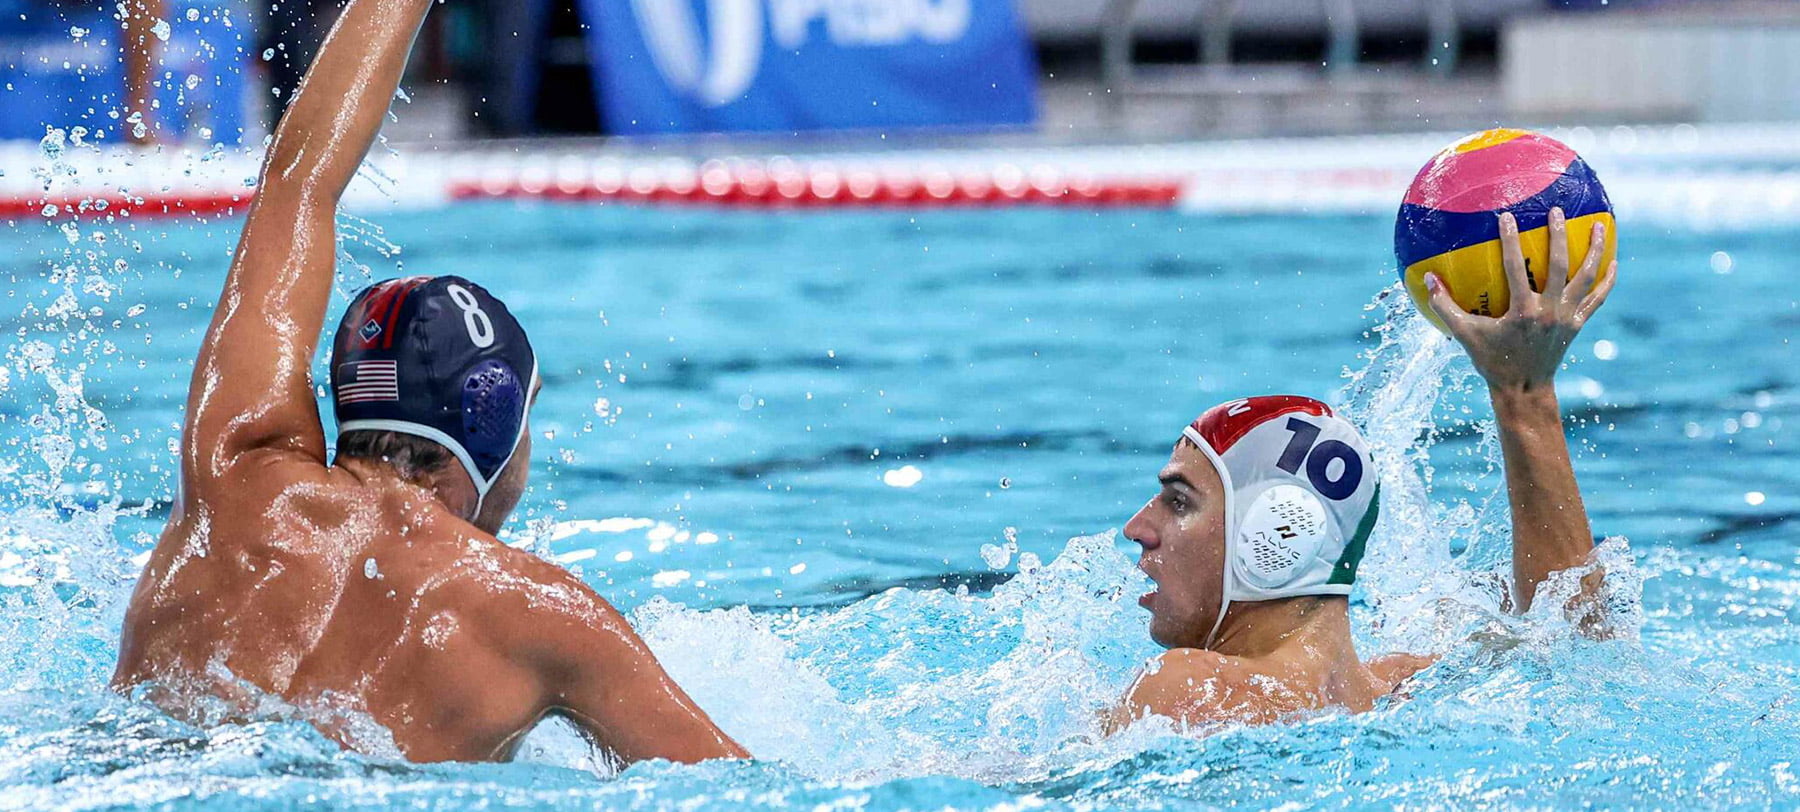 Men's Water Polo Colleges: A Complete List (2023)